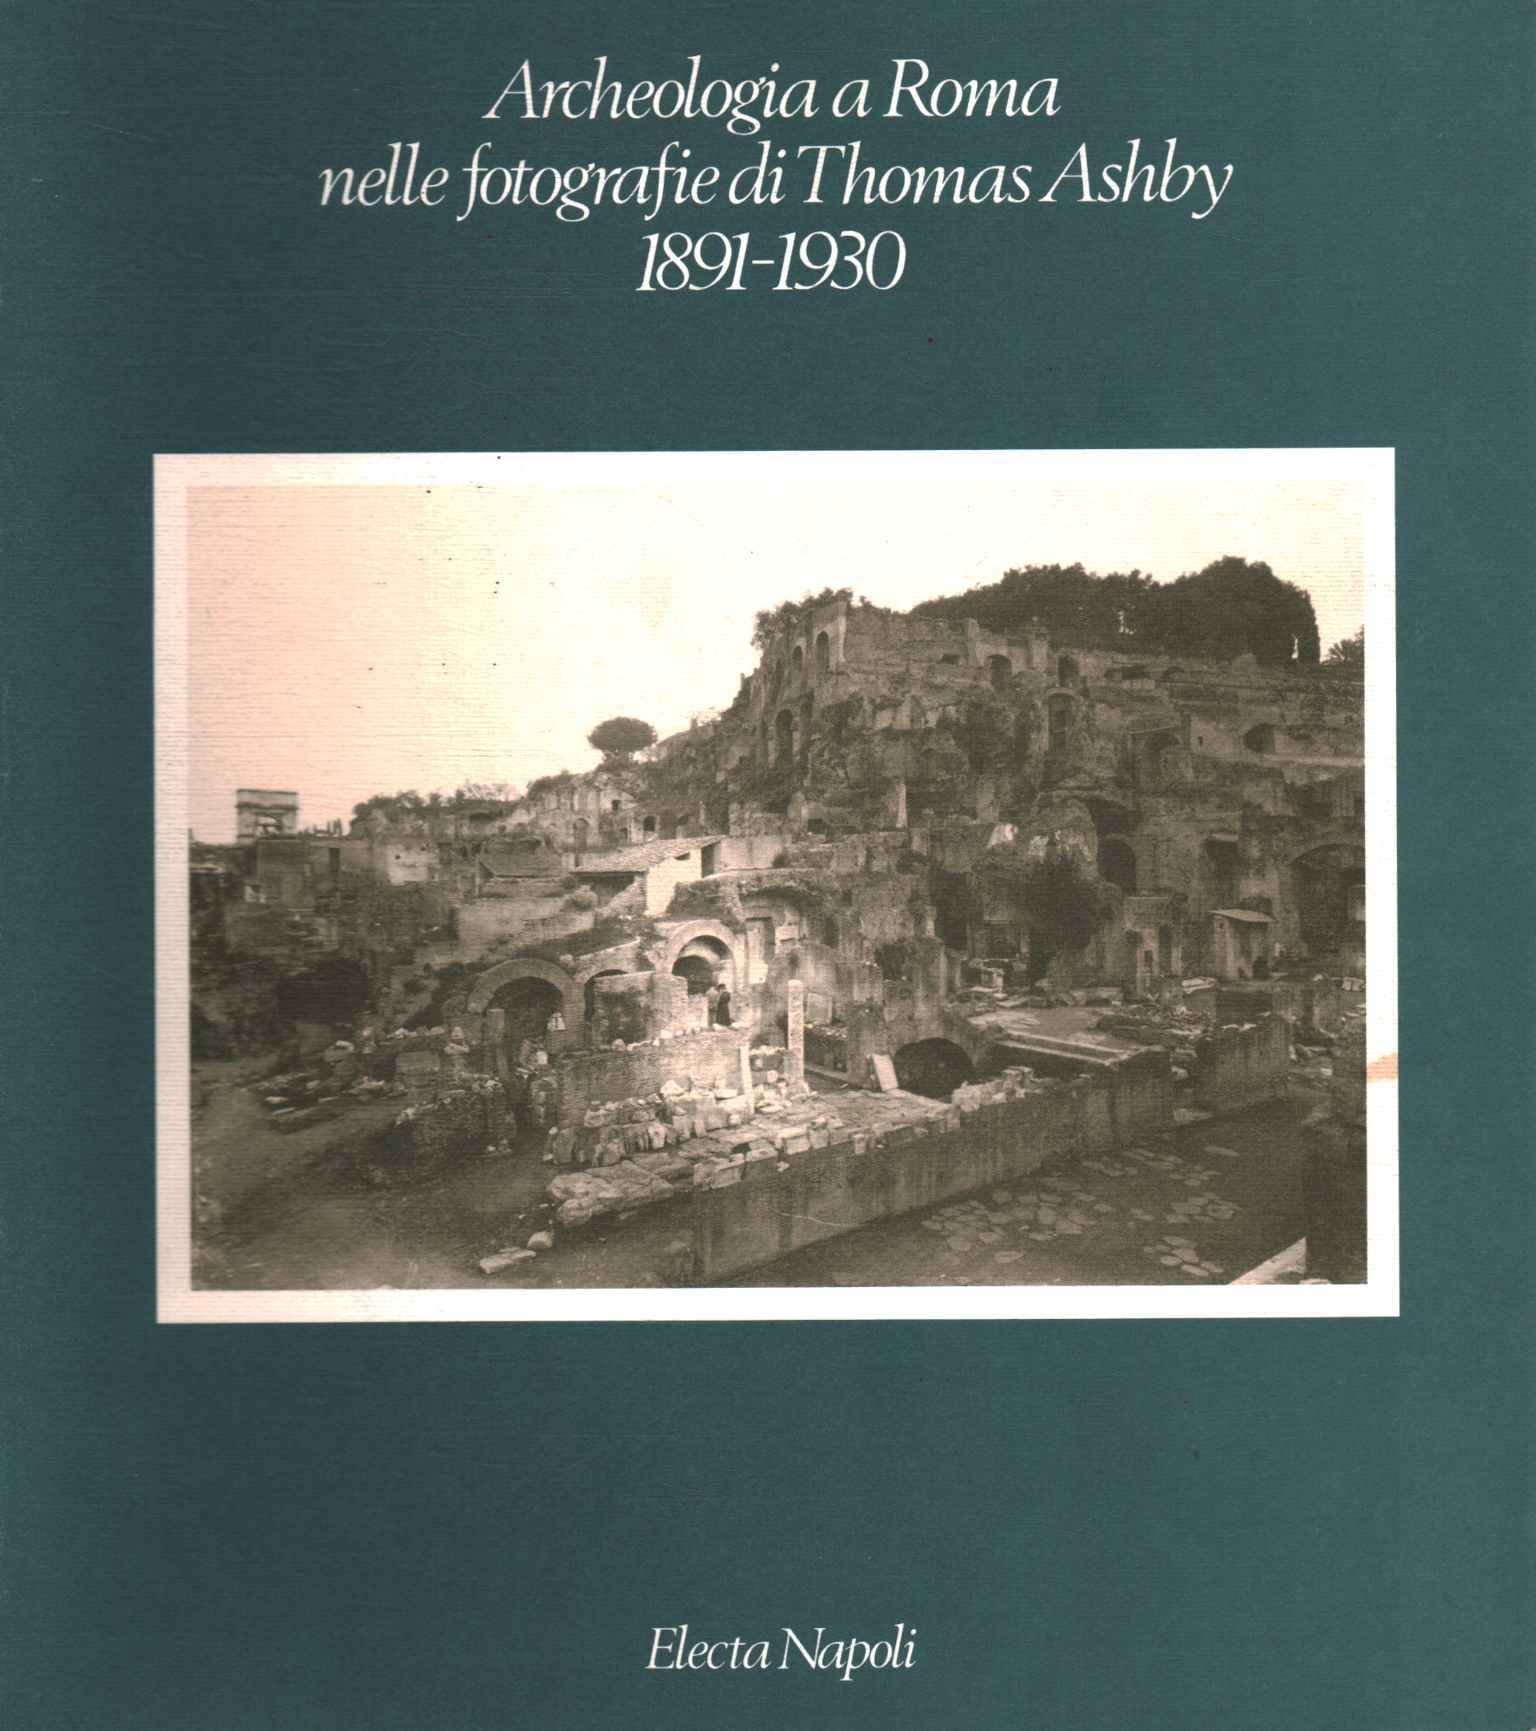 Archeology in Rome in the photographs of%2